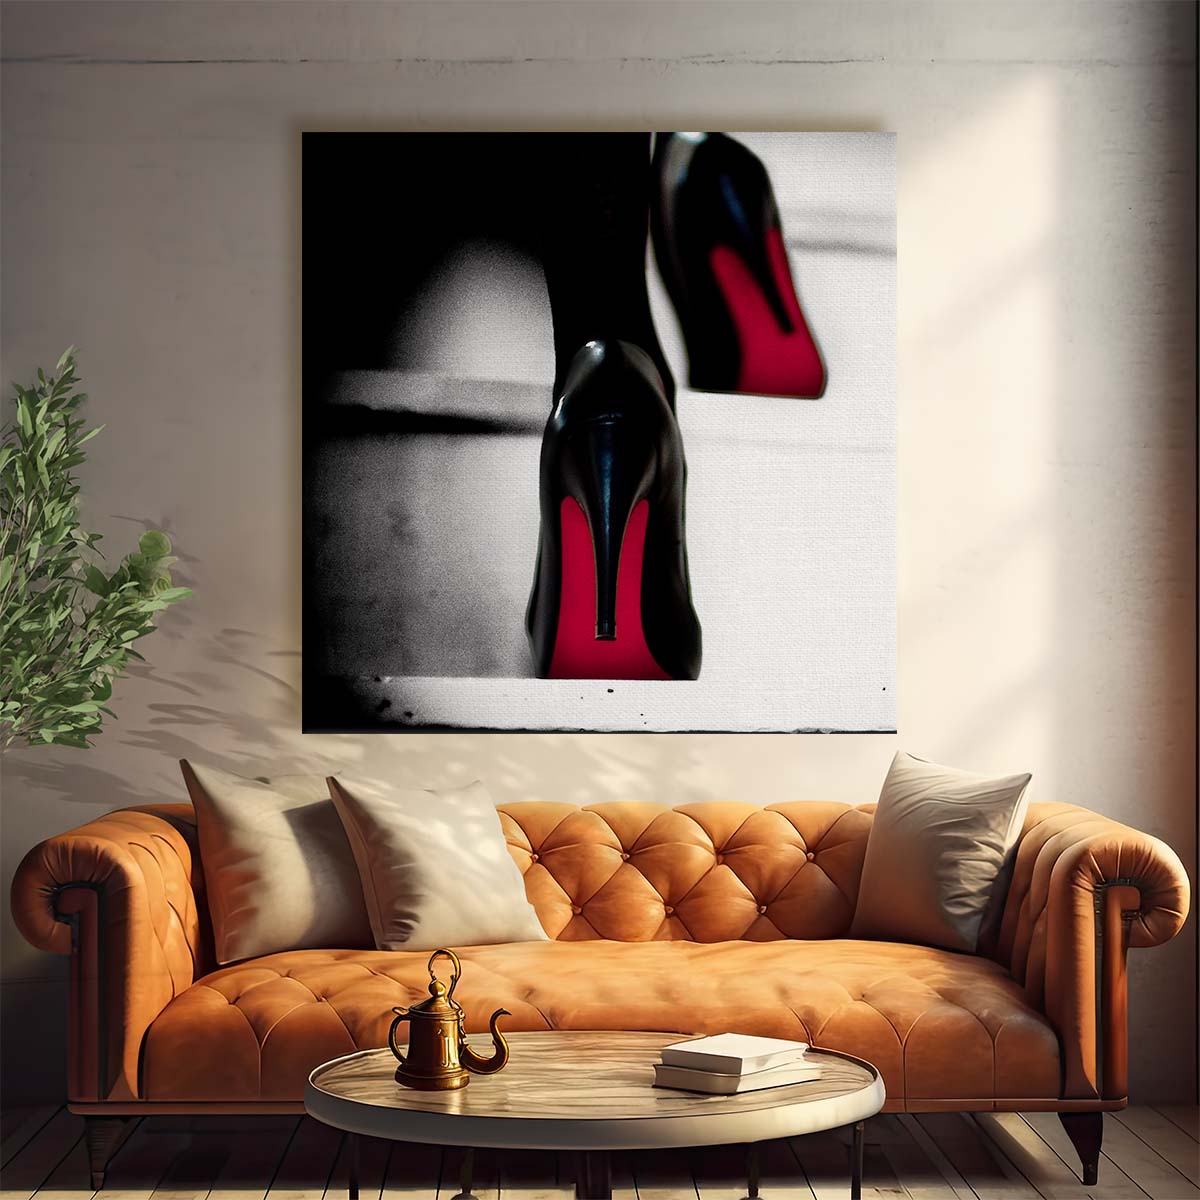 Abstract Parisian Louboutin High Heels Photography Wall Art by Luxuriance Designs. Made in USA.